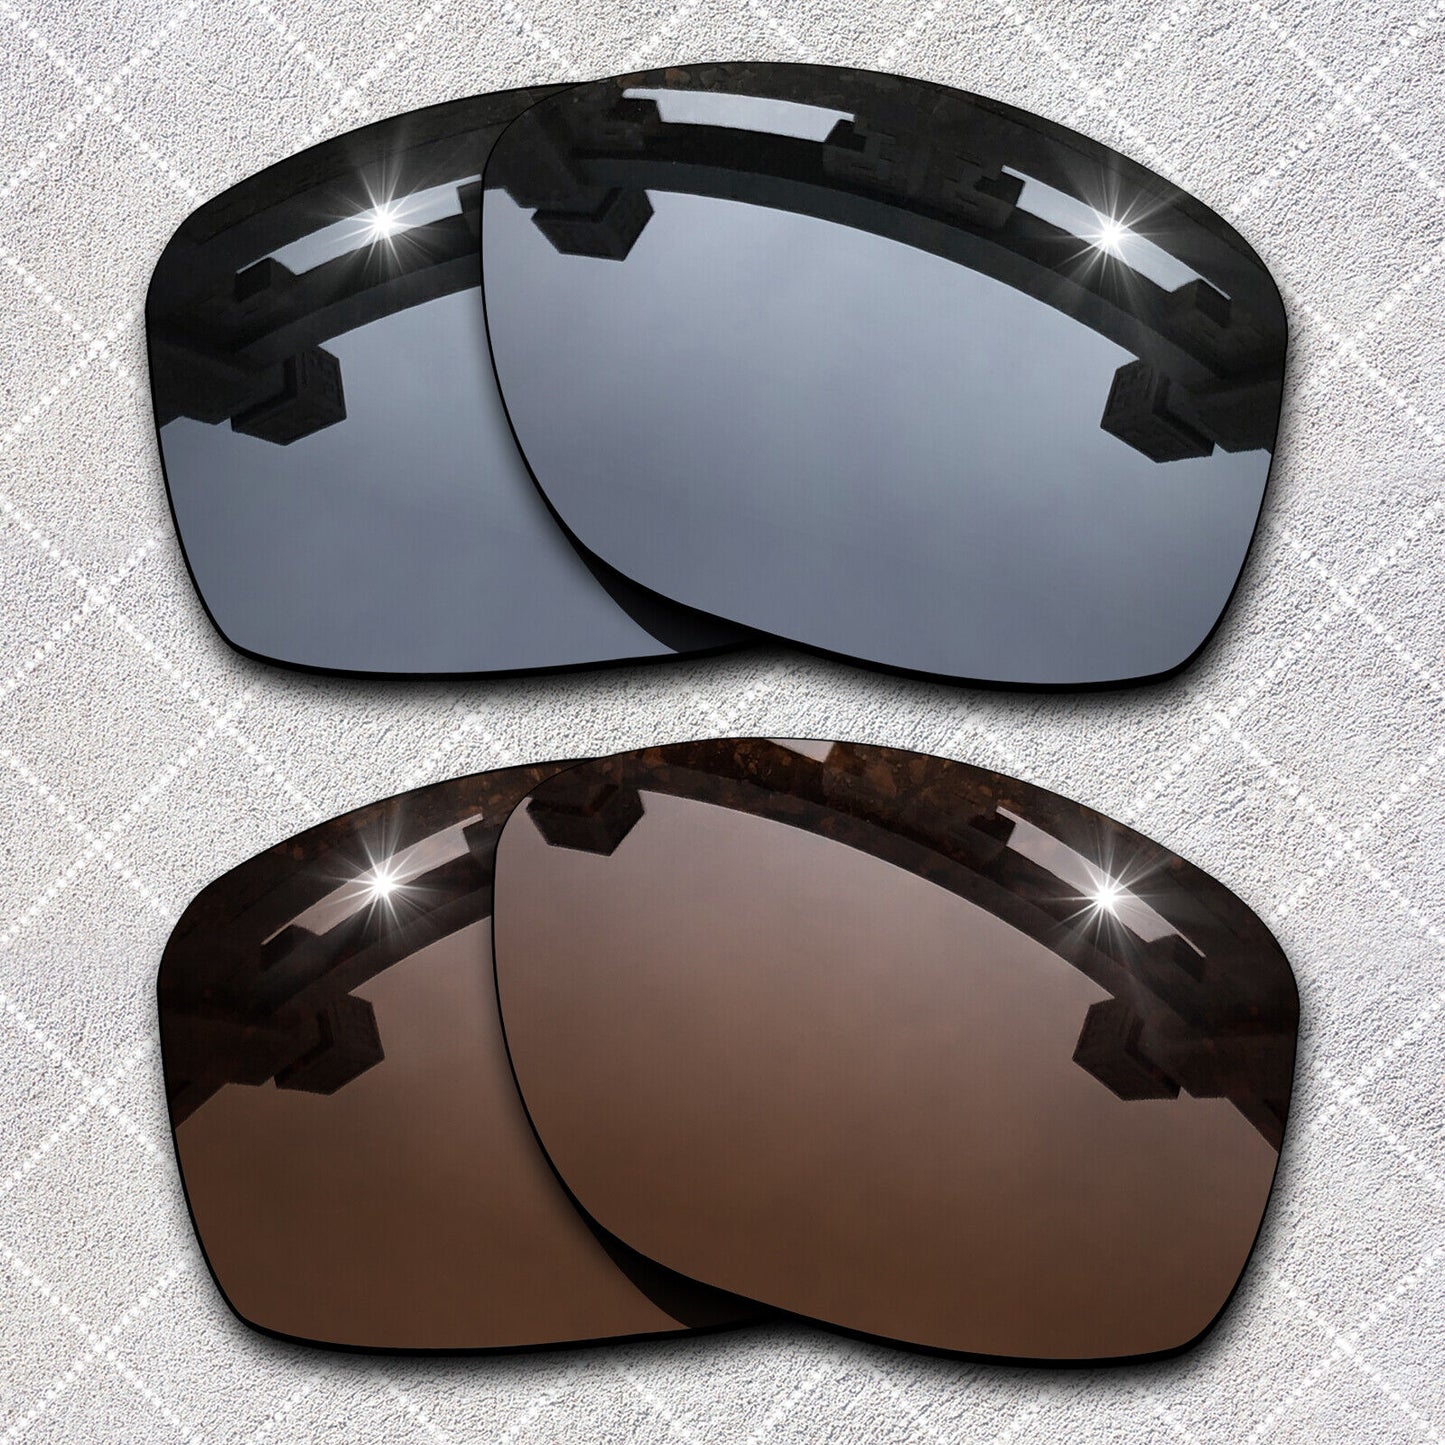 HeyRay Replacement Lenses for Pit Bull OO9127 Sunglasses Polarized - Opt